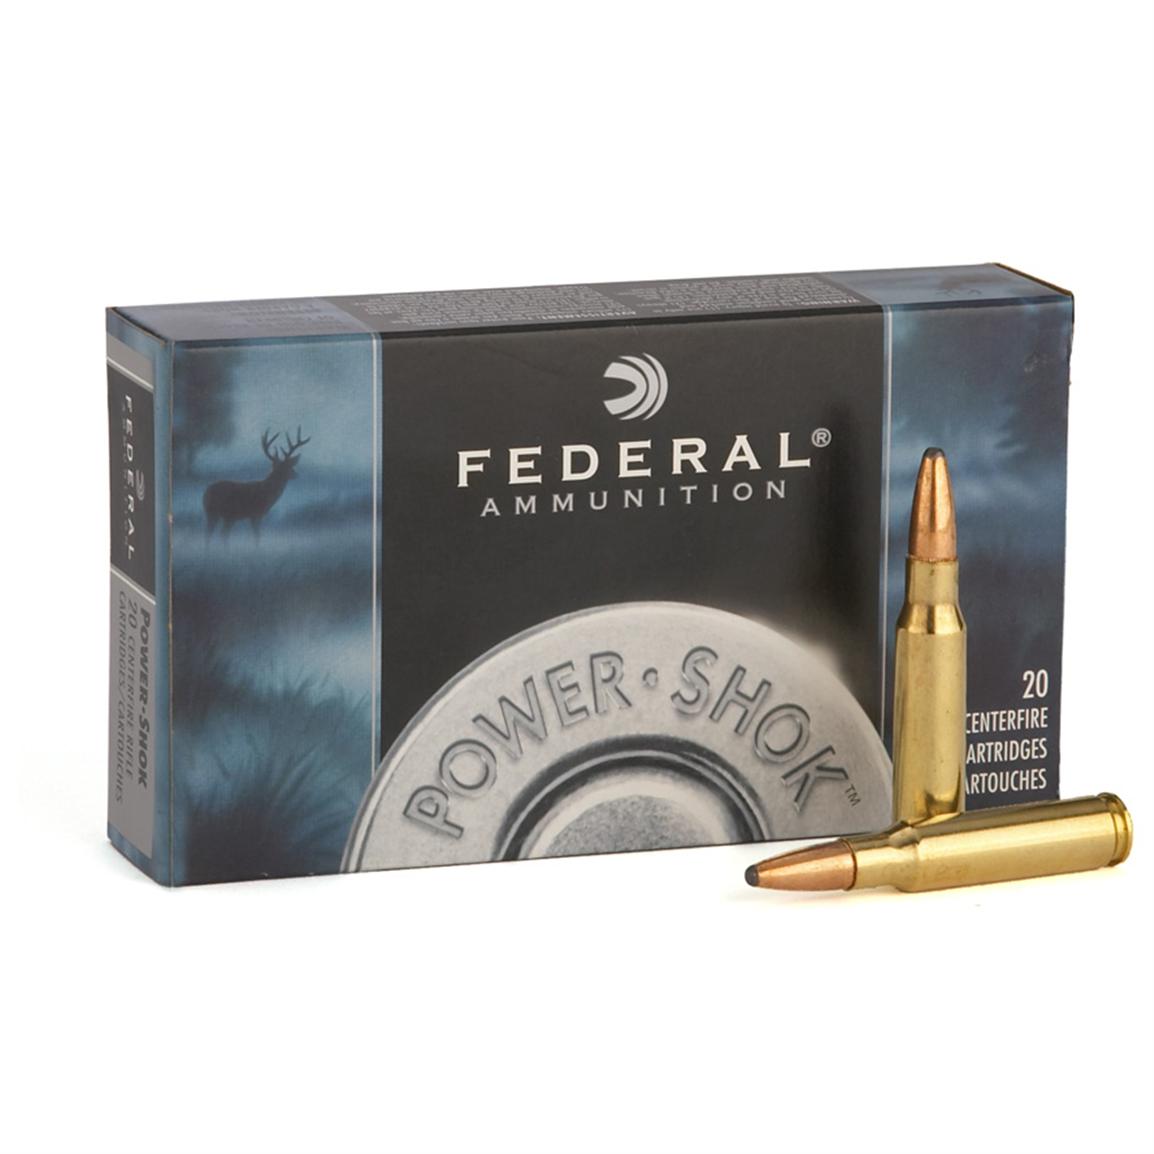 Federal Power Shok 8mm Mauser SP 170 Grain 20 Rounds 97335 8mm Ammo At Sportsman s Guide